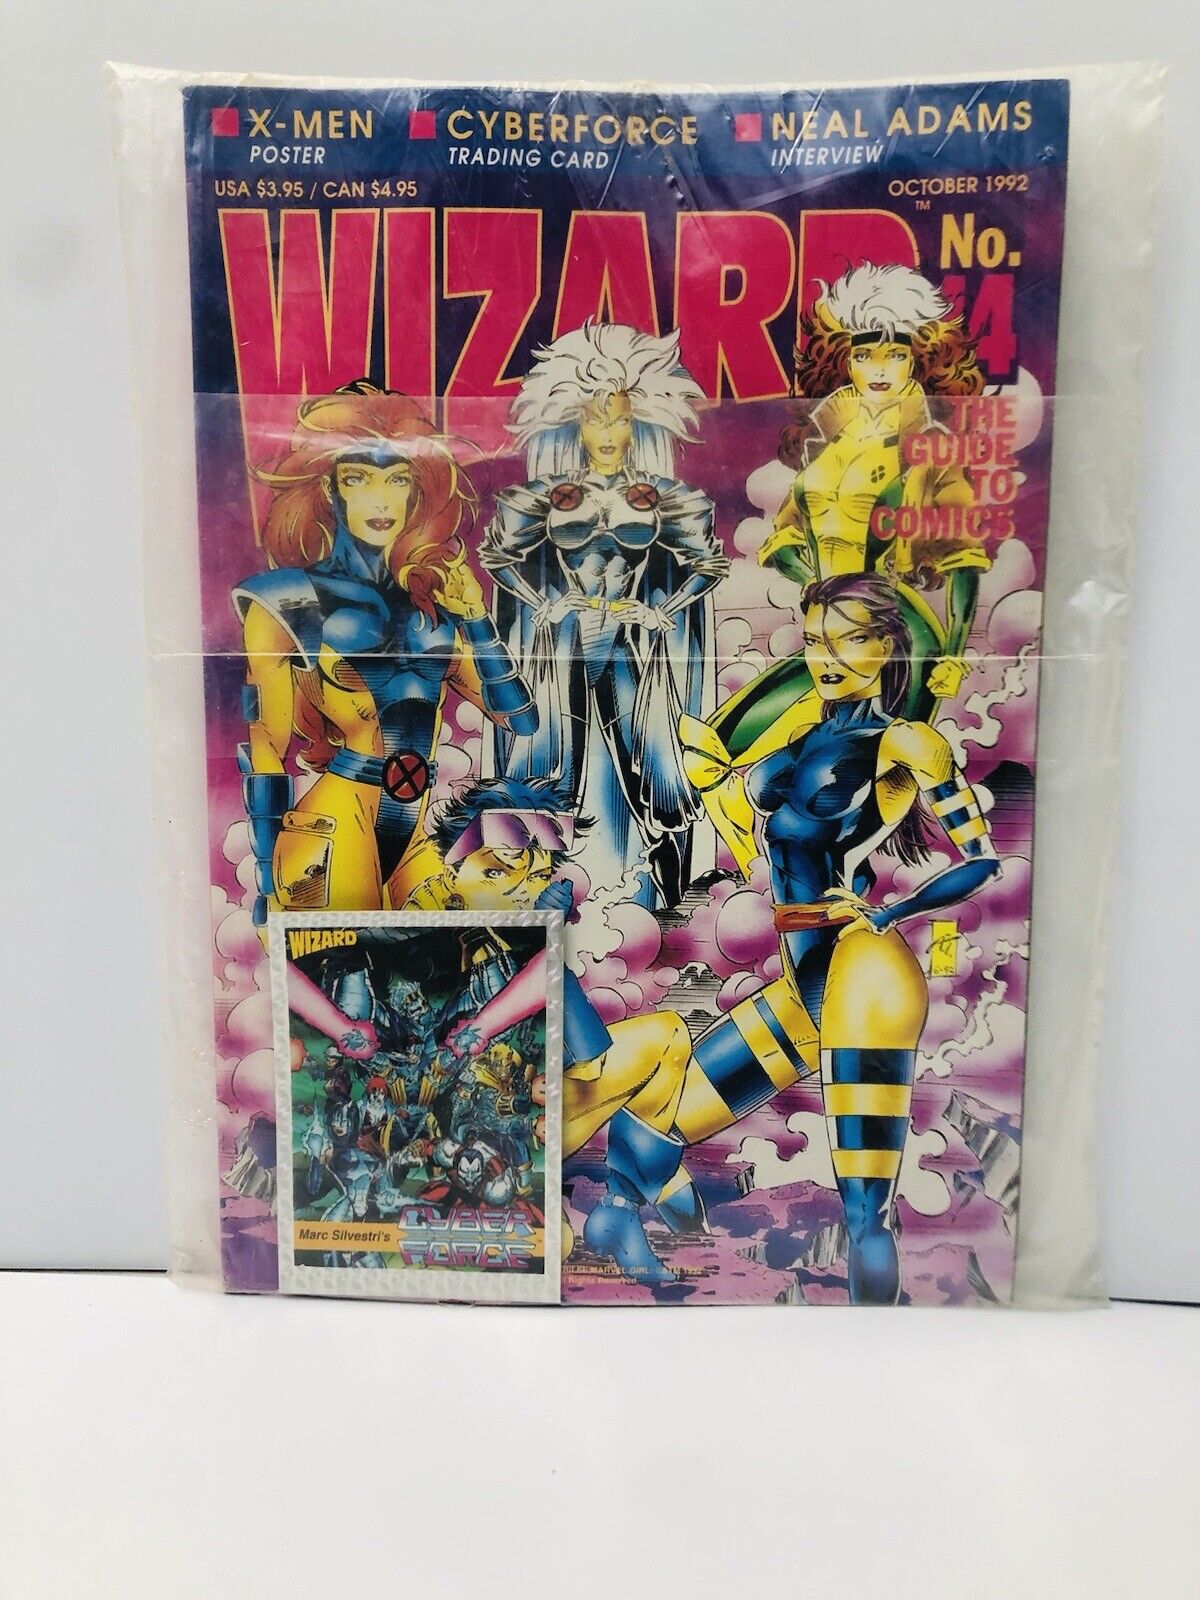 Wizard: The Guide To Comics Magazine Issue Number 14 (October 1992) Sealed New